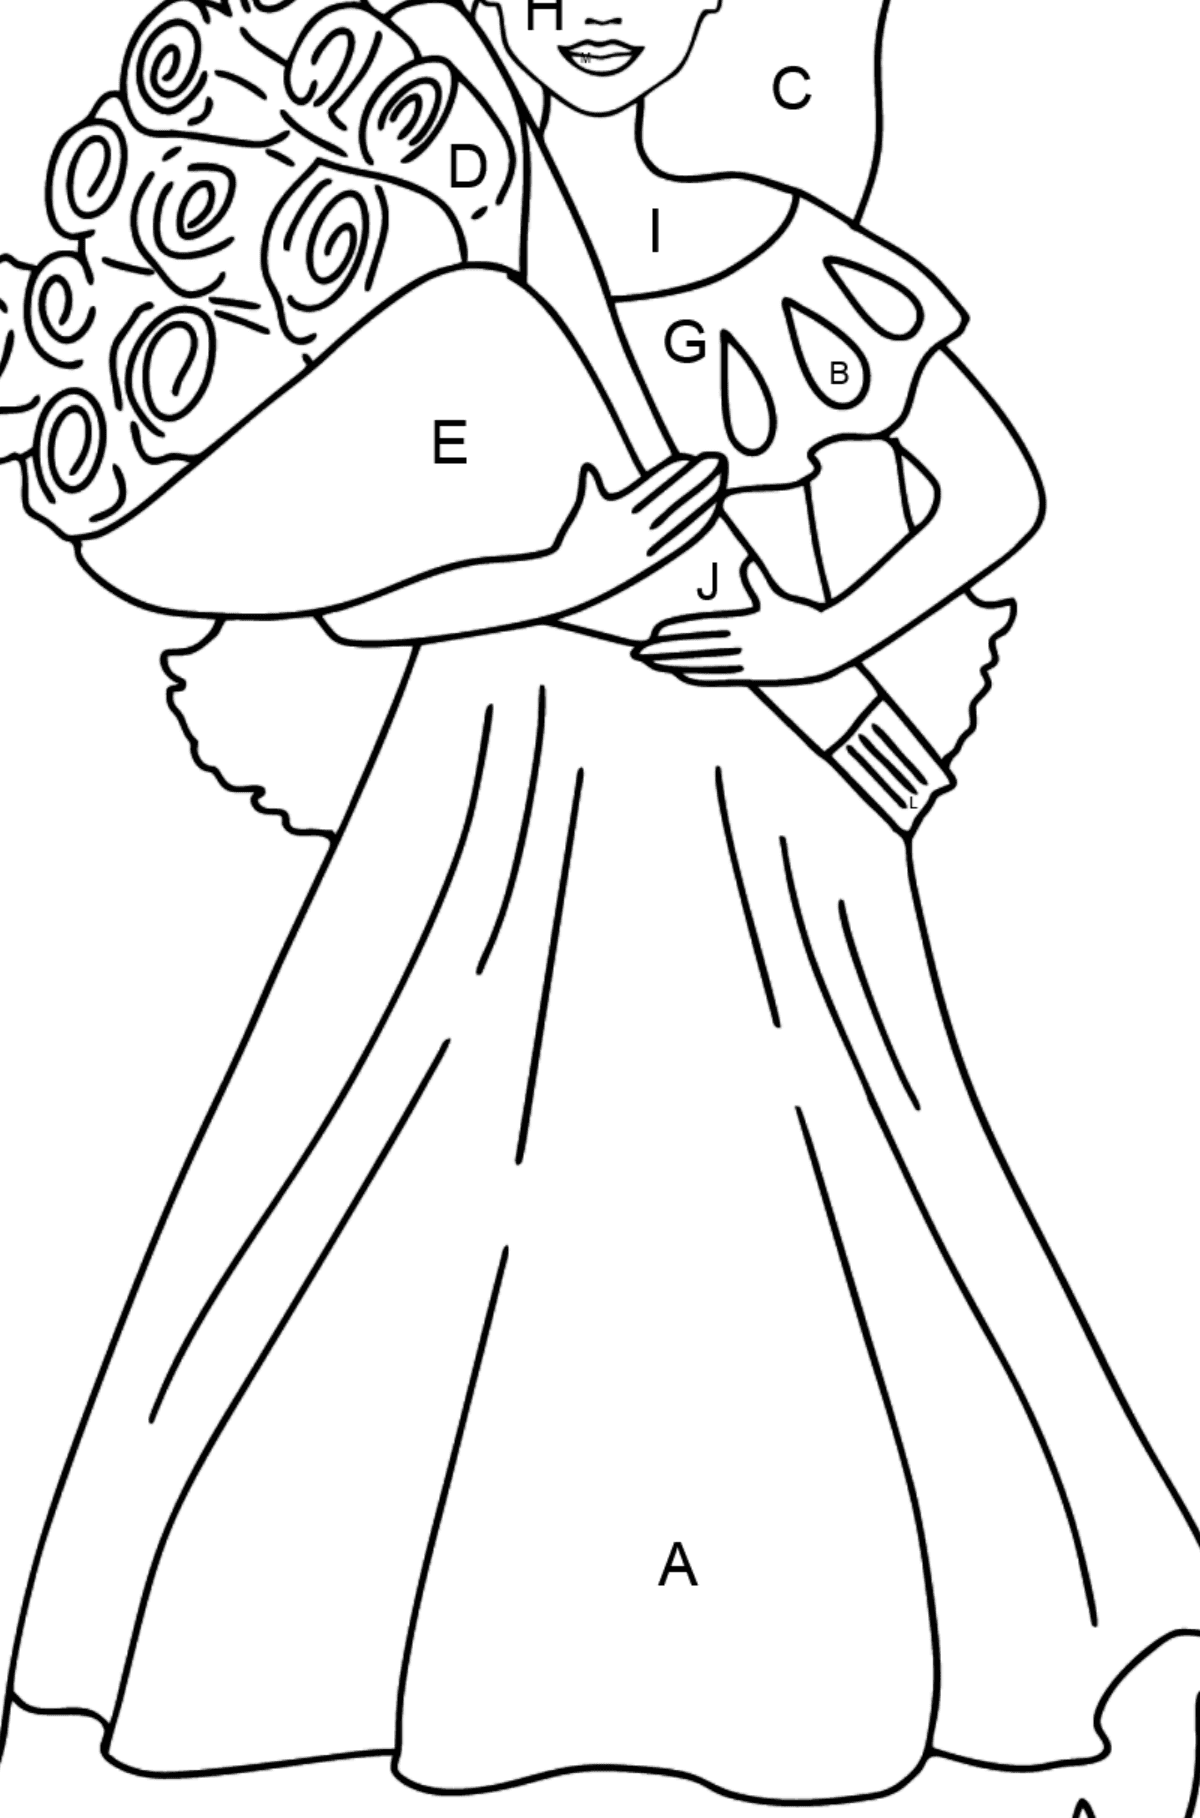 Barbie Doll and a Bouquet of Roses coloring page - Coloring by Letters for Kids